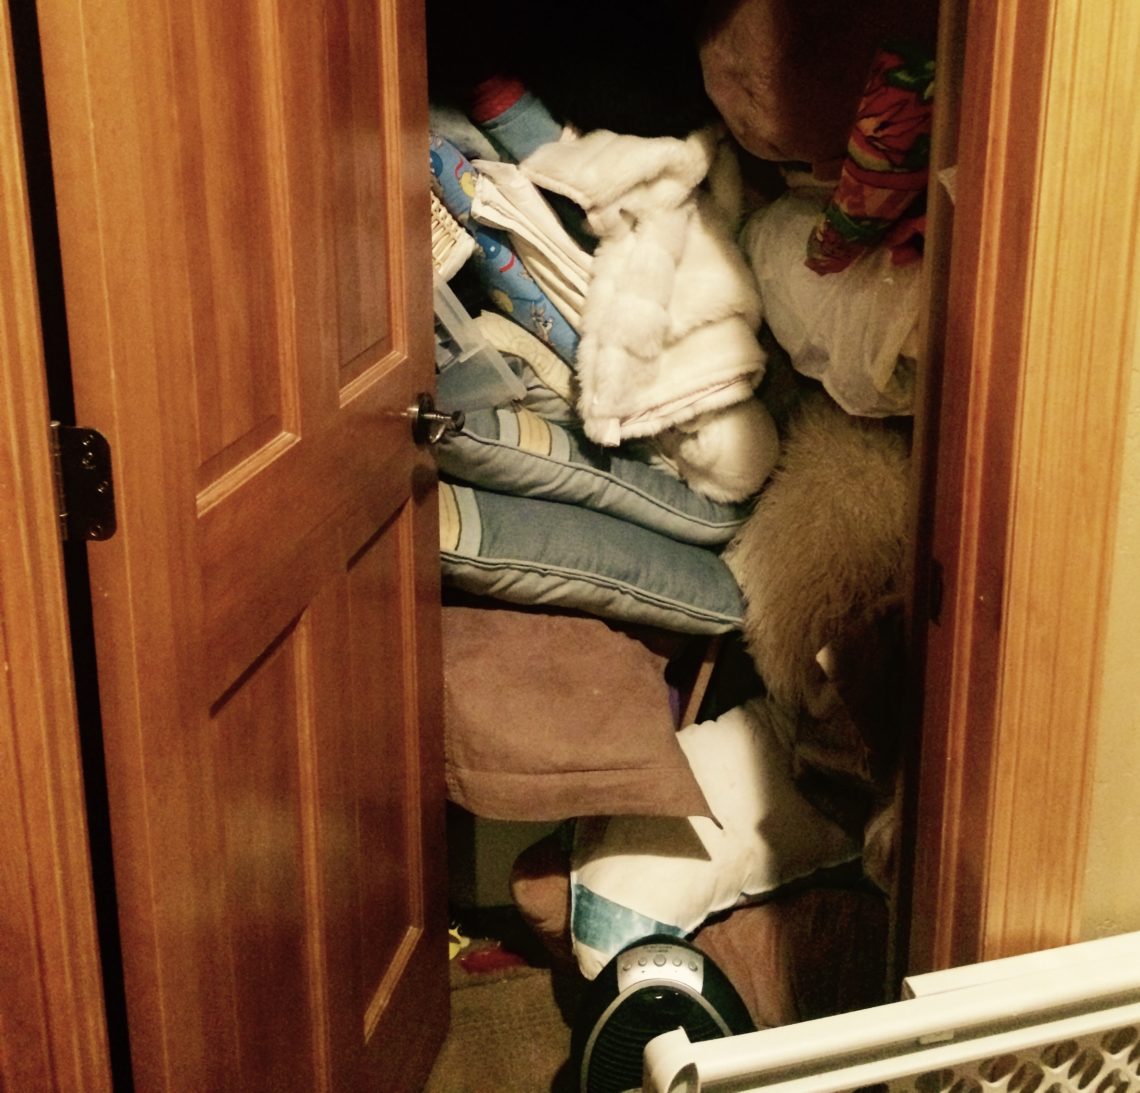 A disorganized closet with junk spilling out